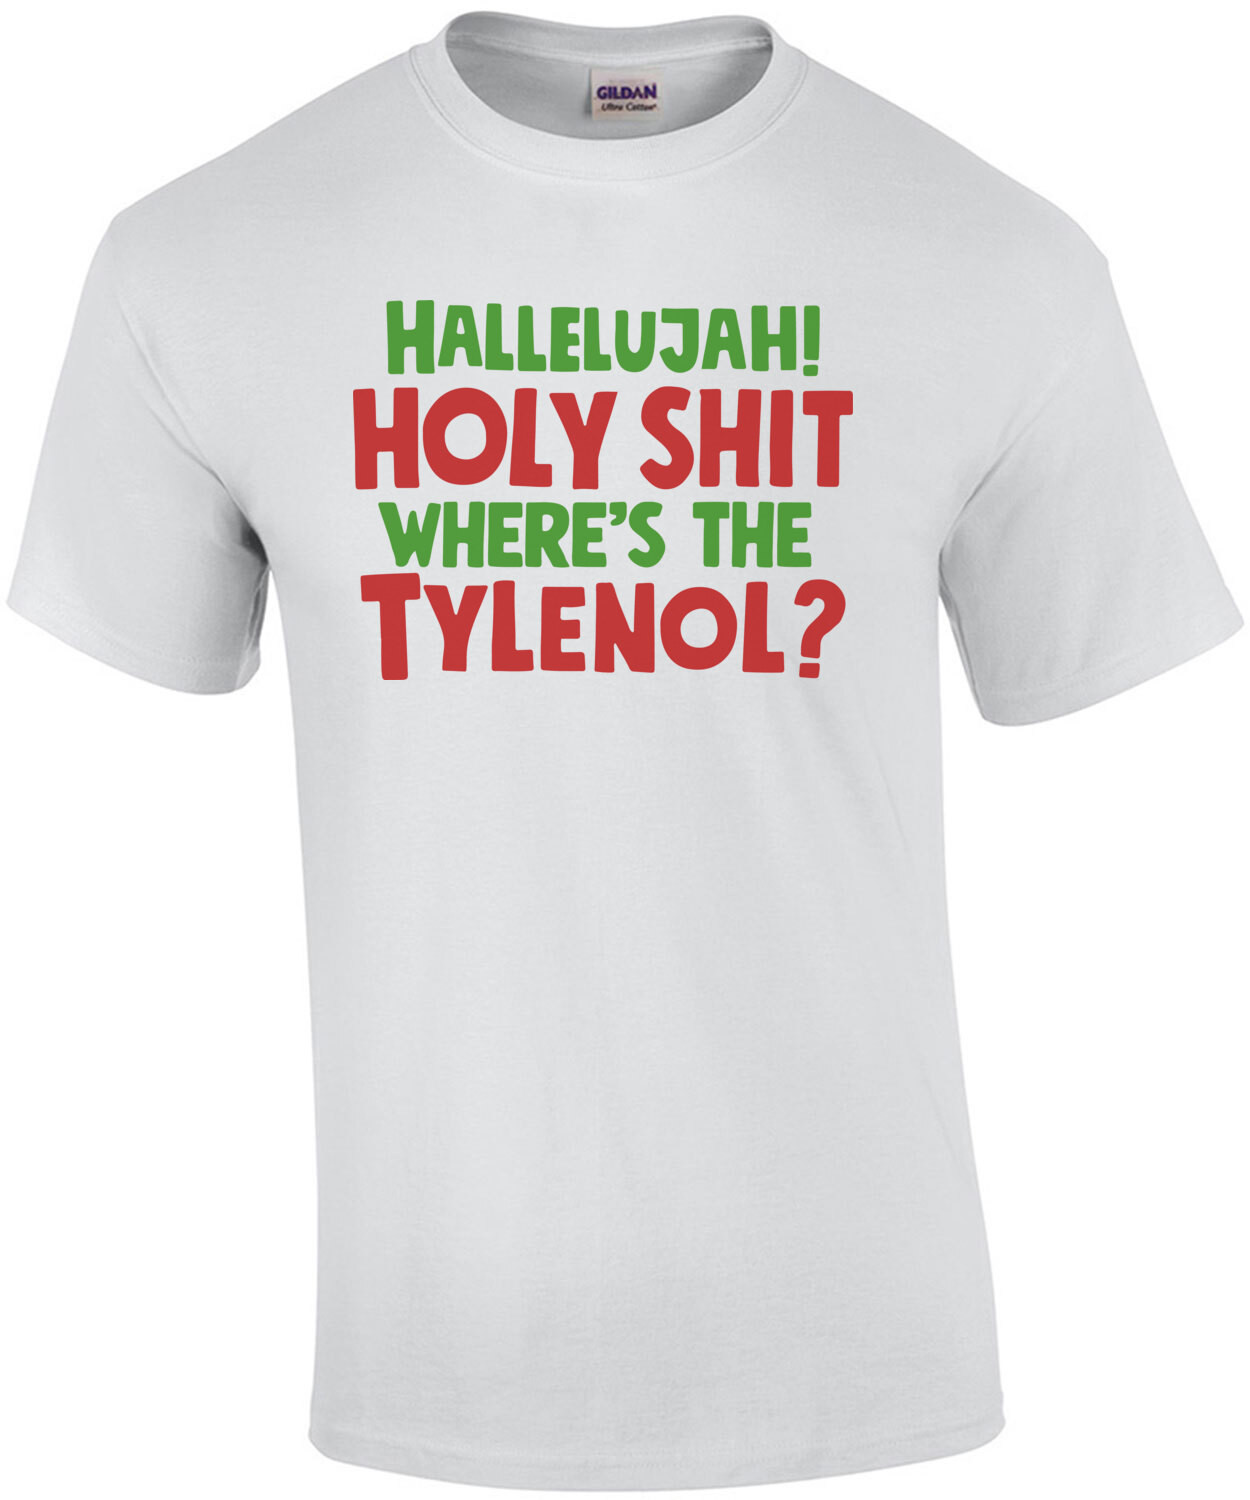 Hallelujah! Holy Shit Where's The Tylenol? Christmas Vacation T-Shirt